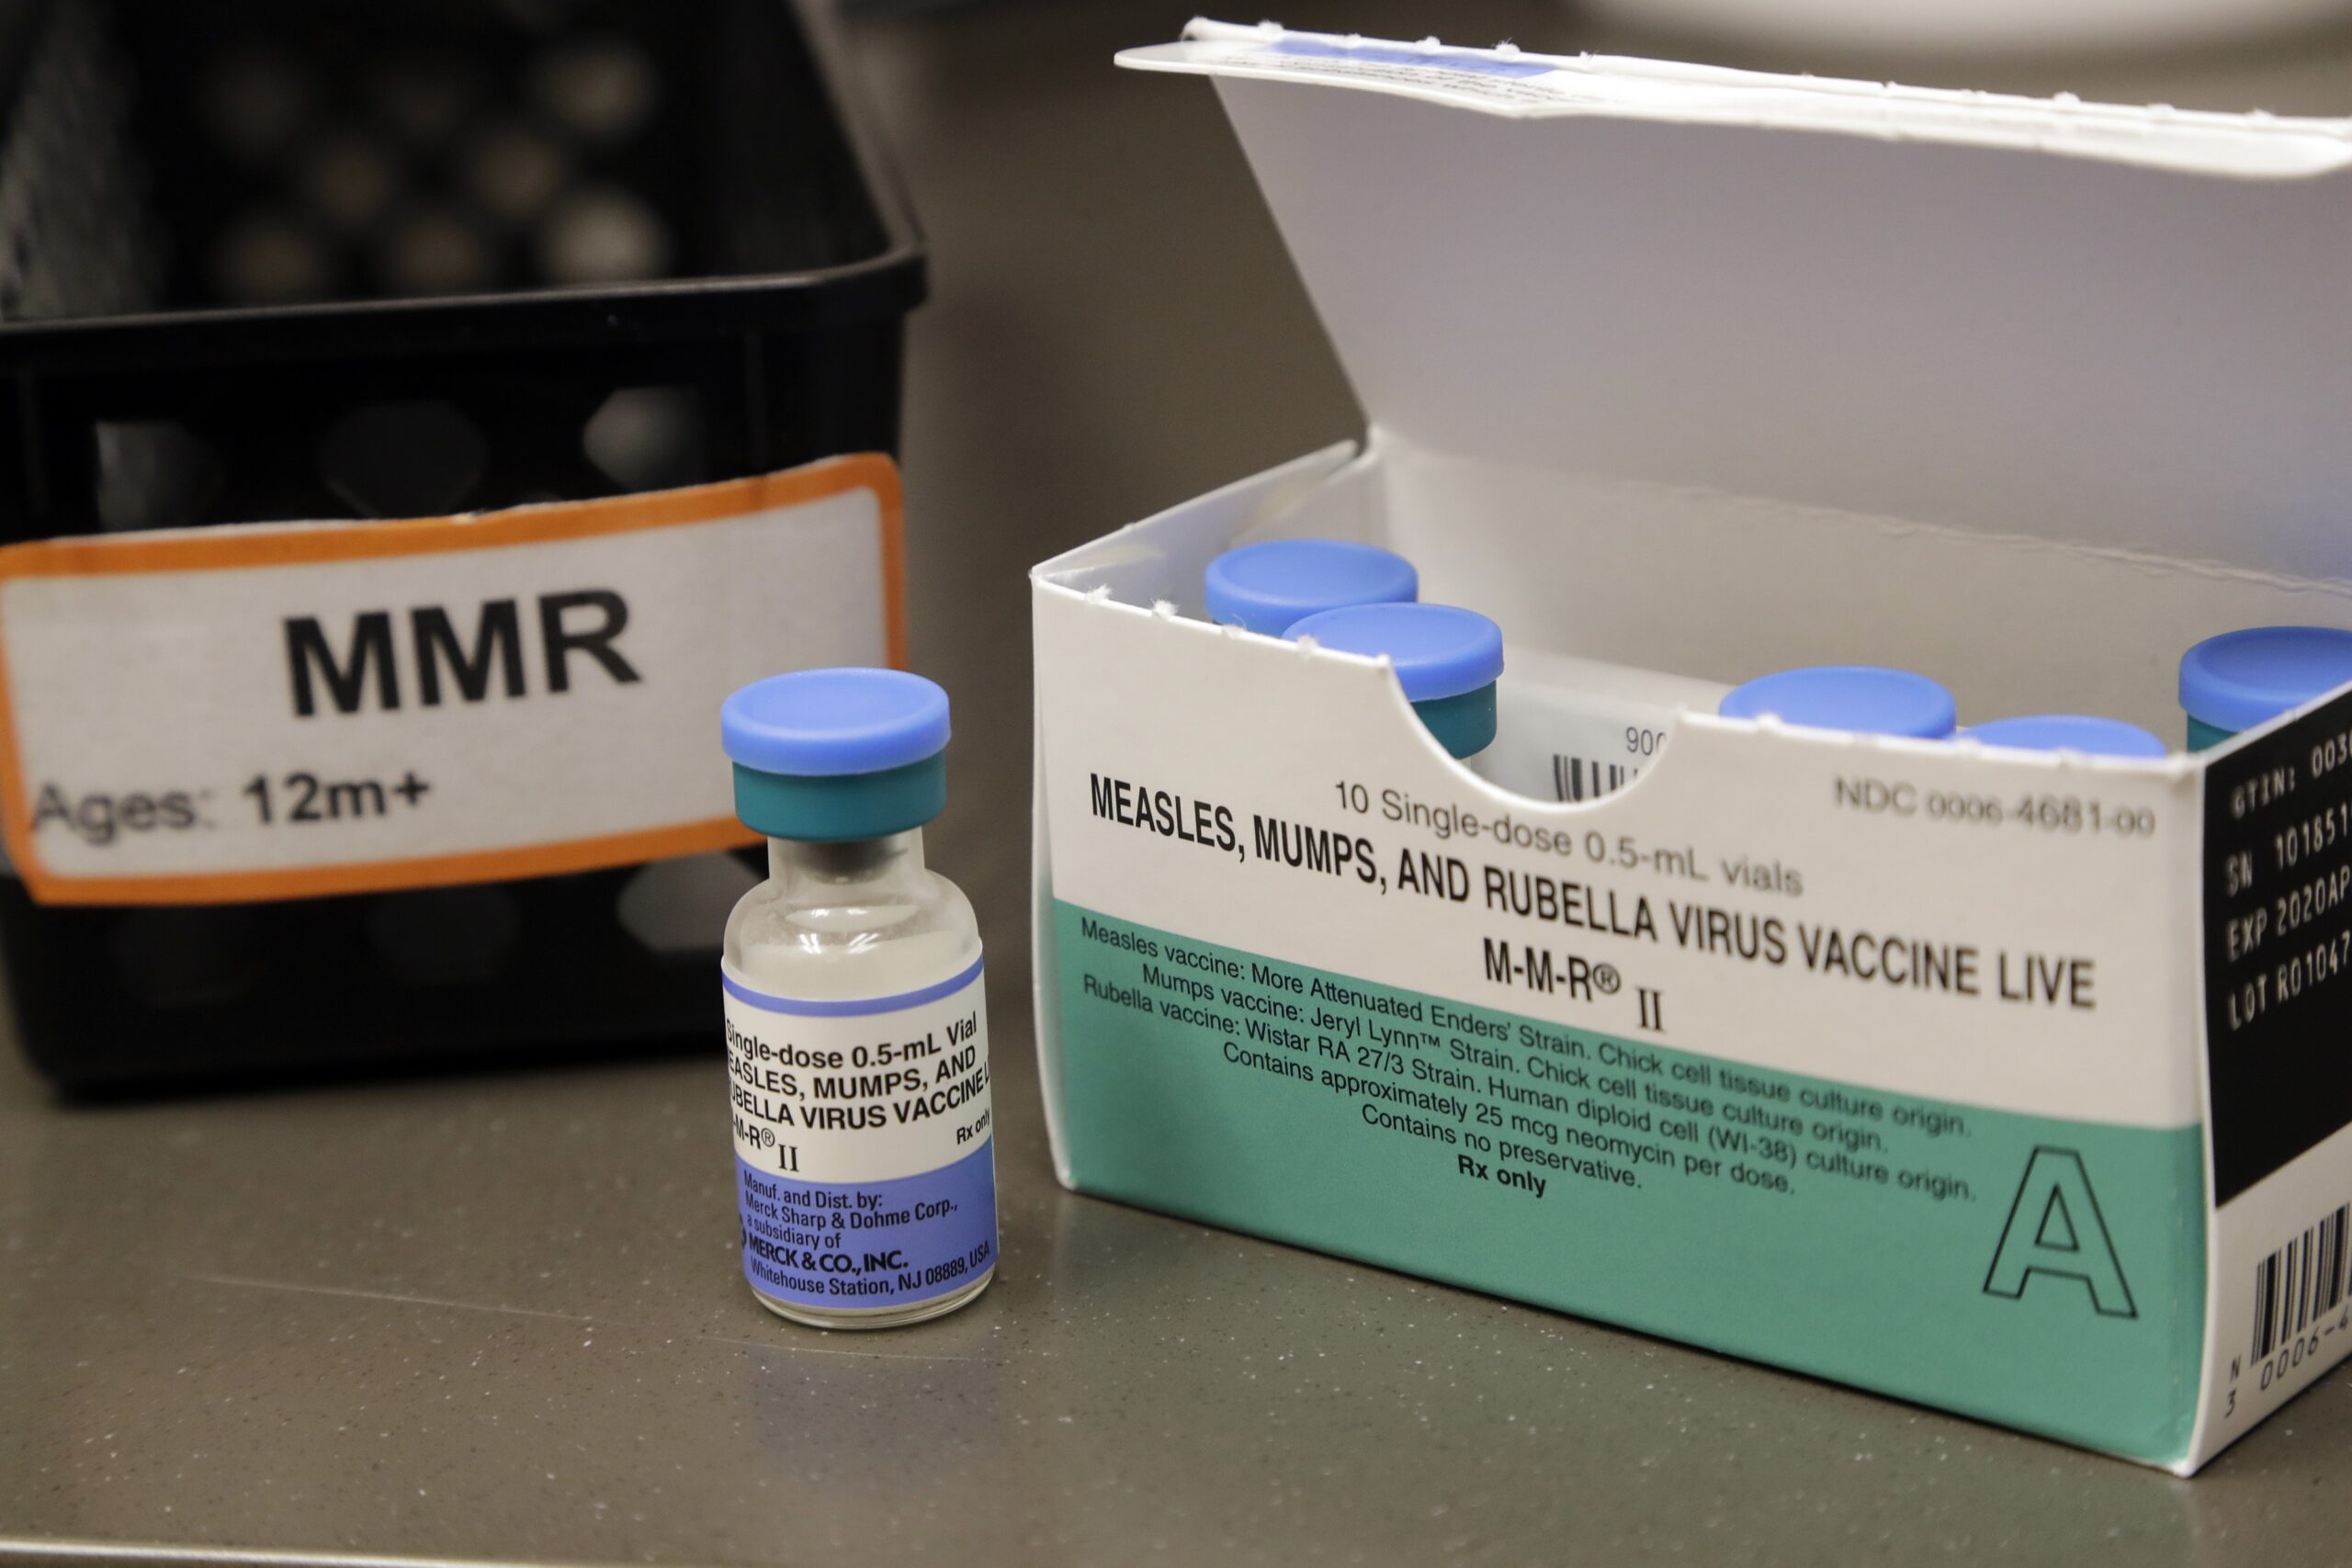 A dose of the MMR vaccine